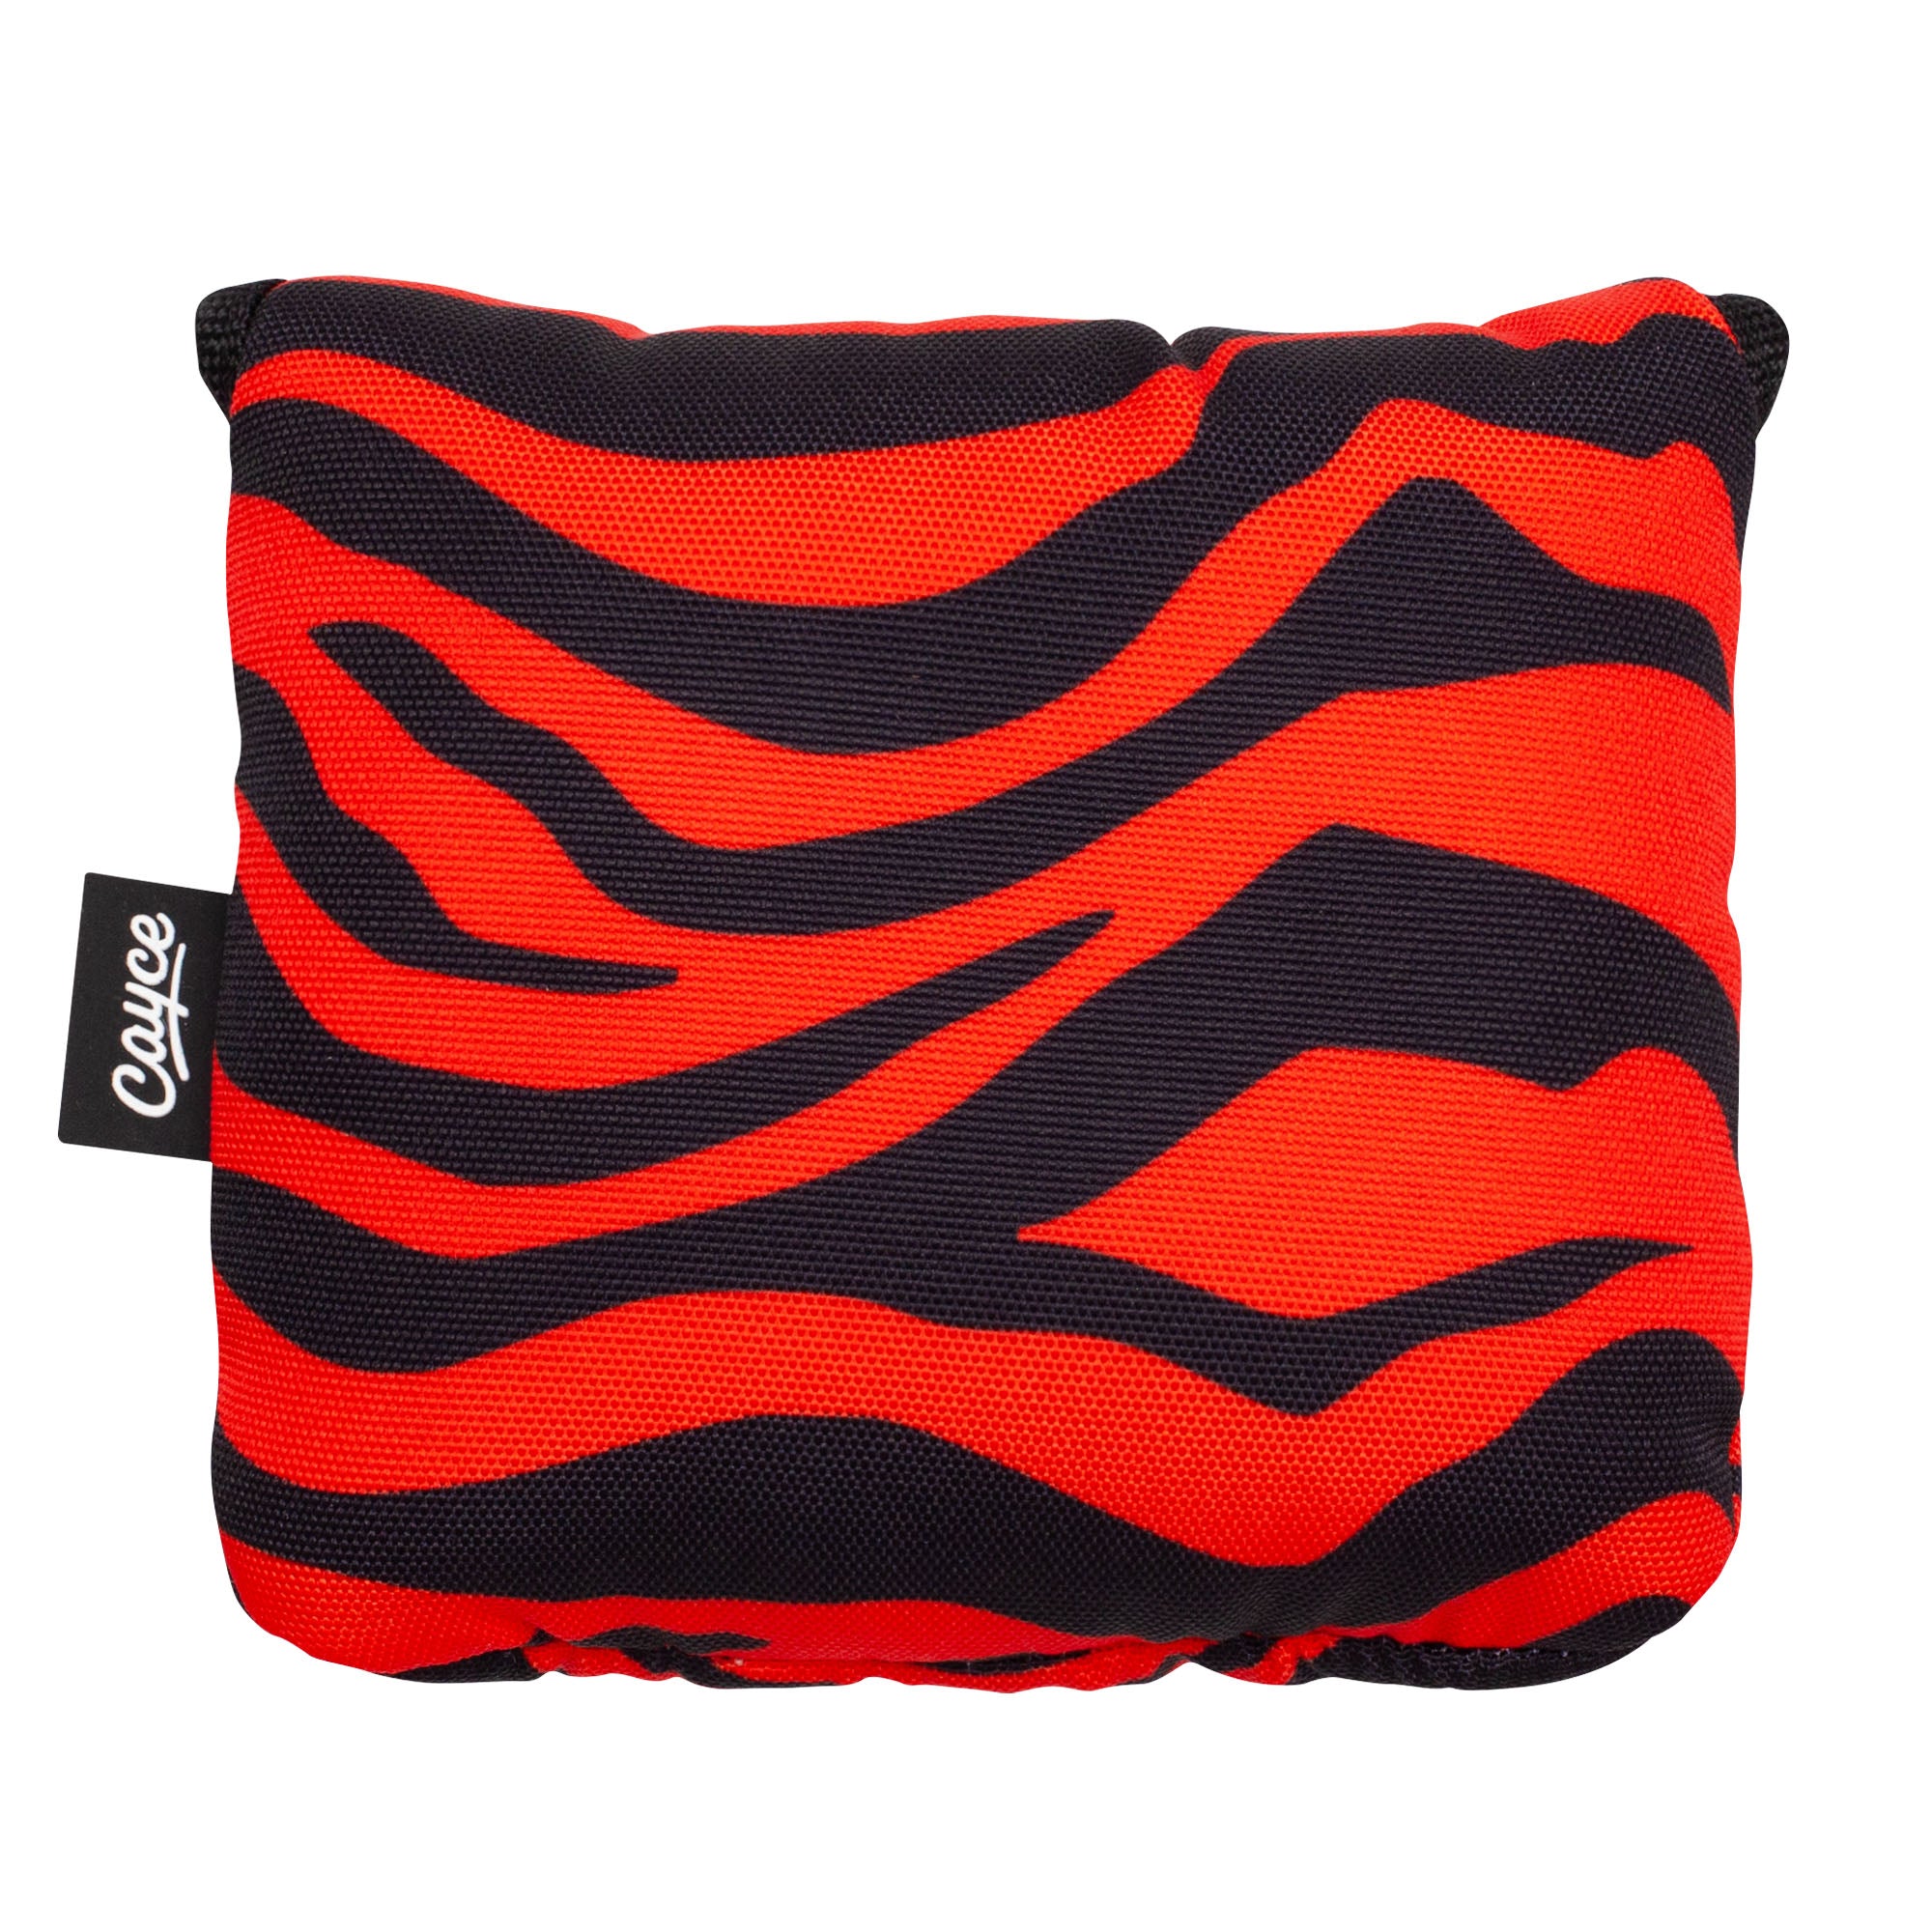 A bright, orange and black tiger-striped, square, magnetic mallet putter headcover.